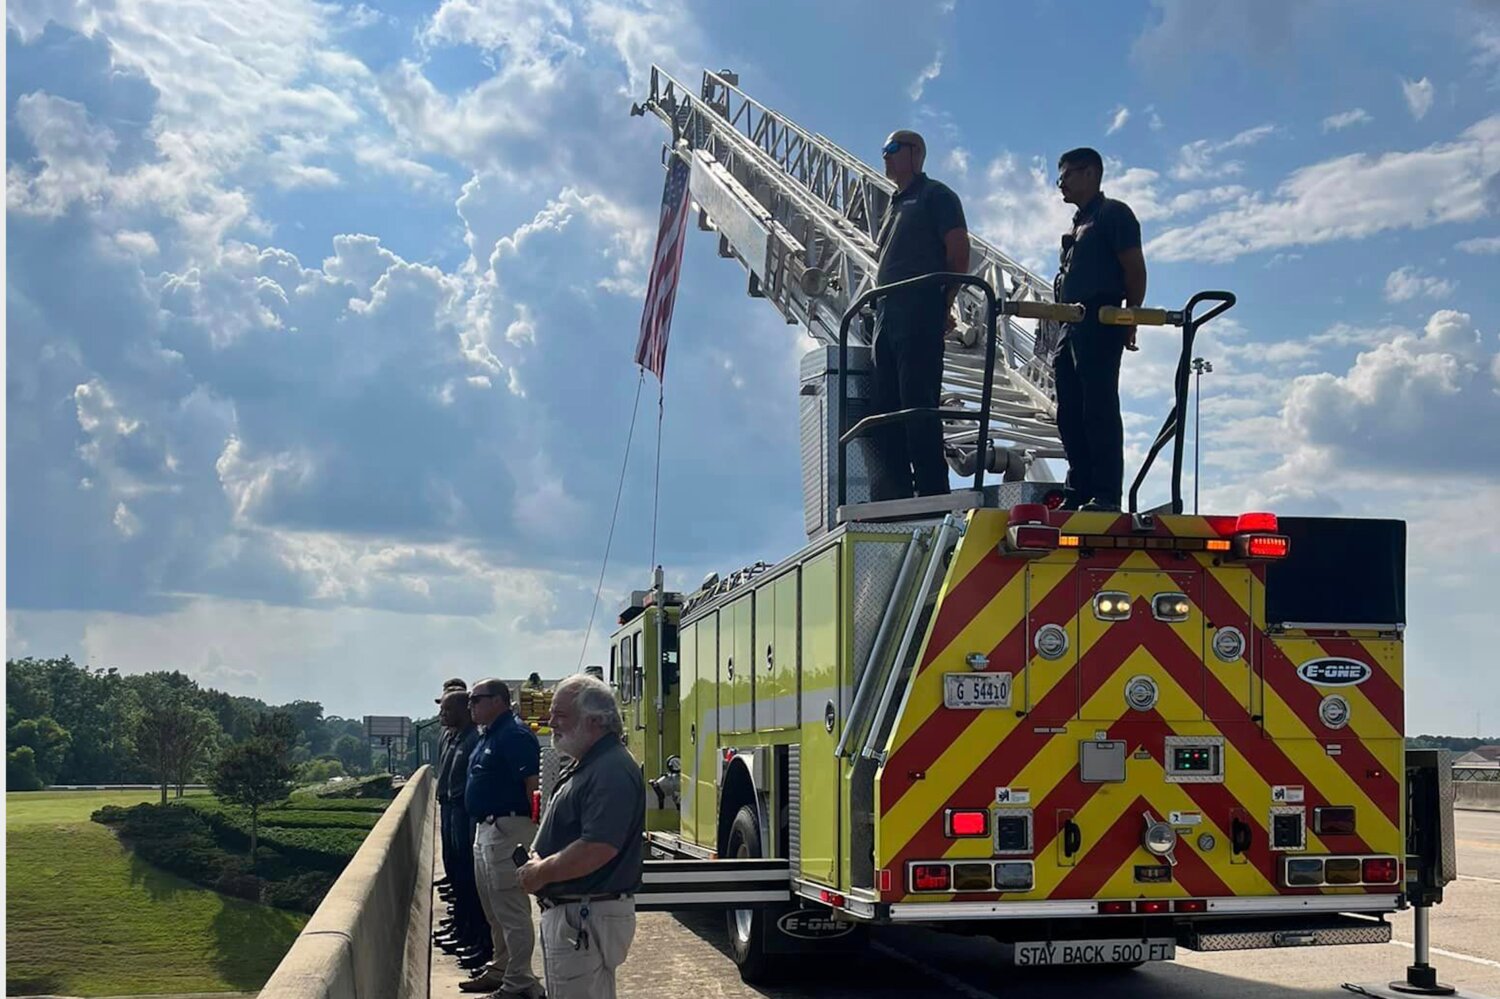 Tyler was transported to the funeral home on June 1. Ridgeland Fire Fighters hoisted a flag on one of their ladder trucks along the route in his honor. “We were blessed to honor Madison Police Officer Randy Tyler during the procession to the funeral home today,” A social media statement from RFD reads. “thank you for your ultimate sacrifice and your years of dedication to making this world safer.”